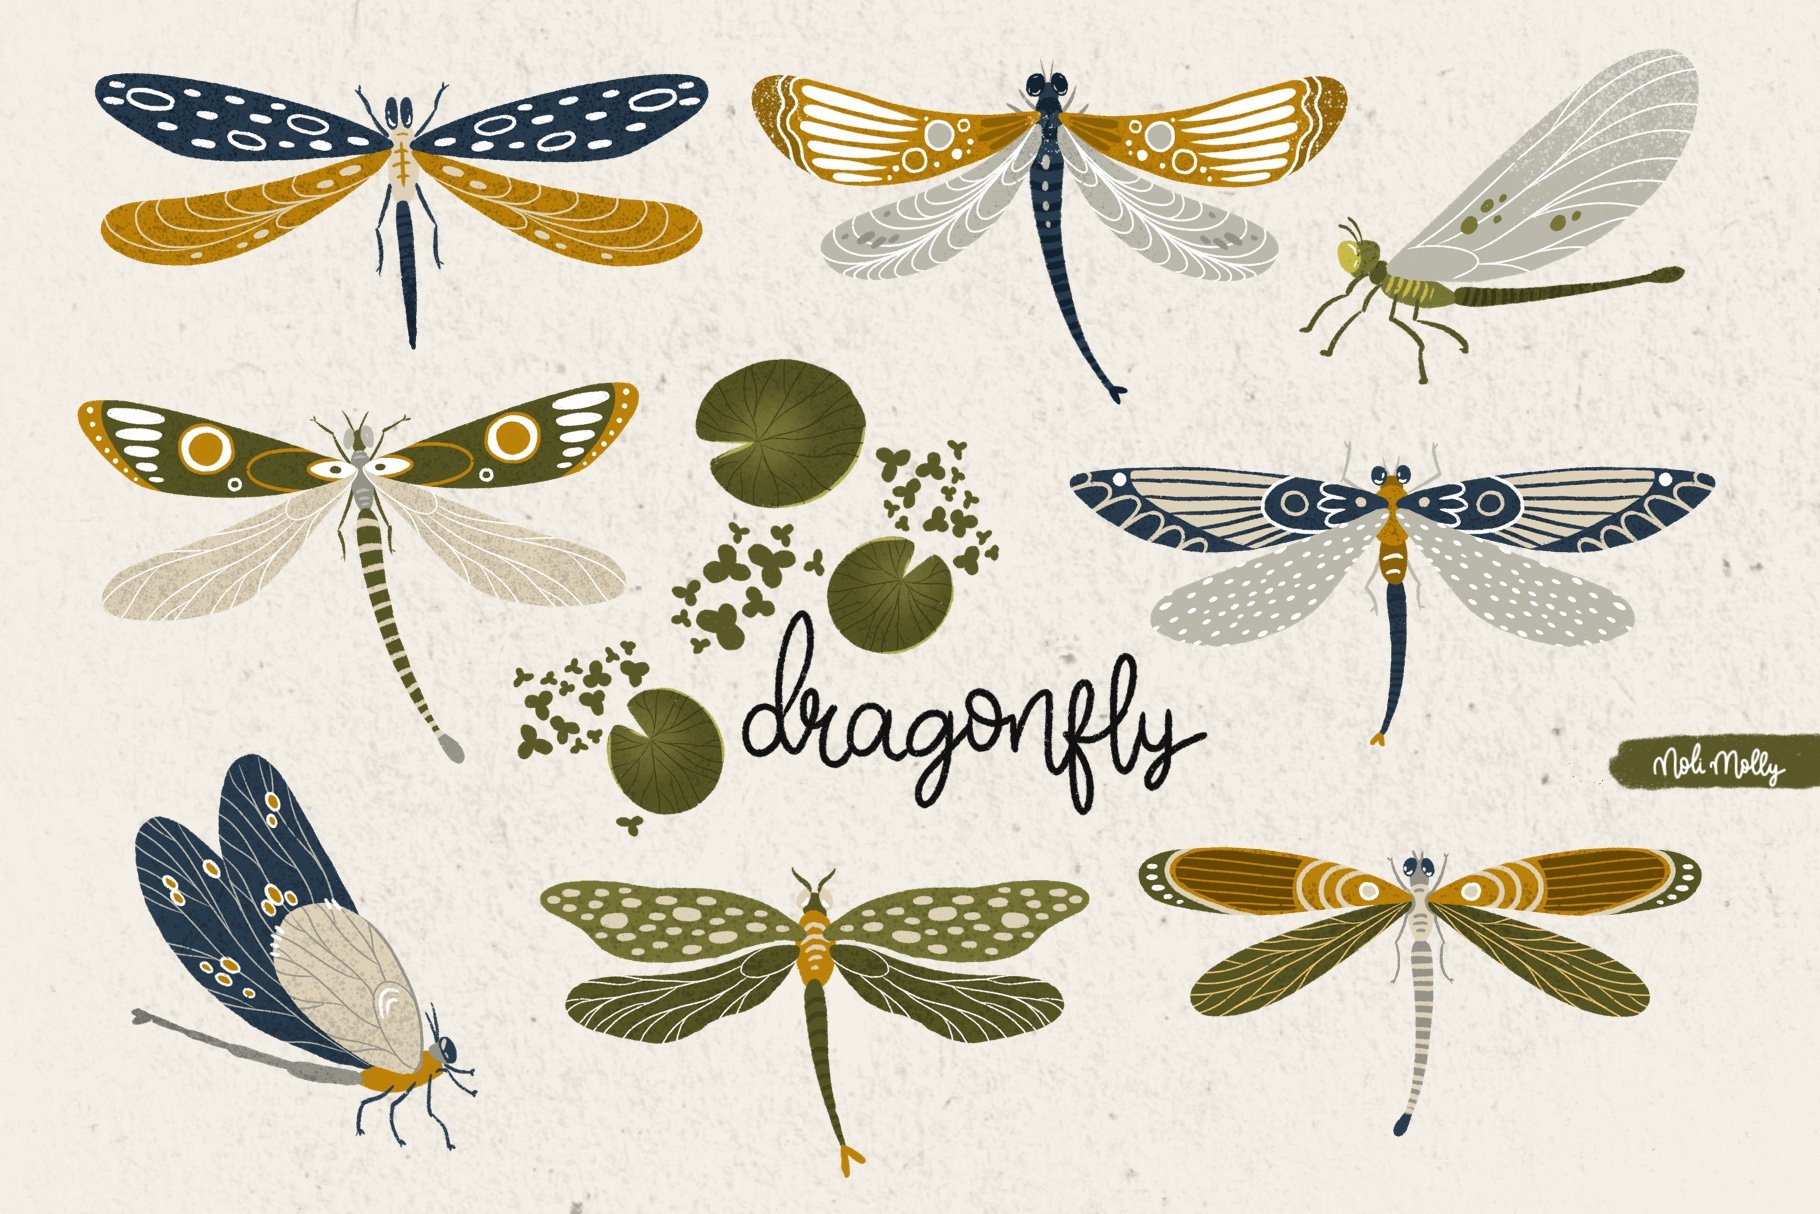 Dragonflies cover image.